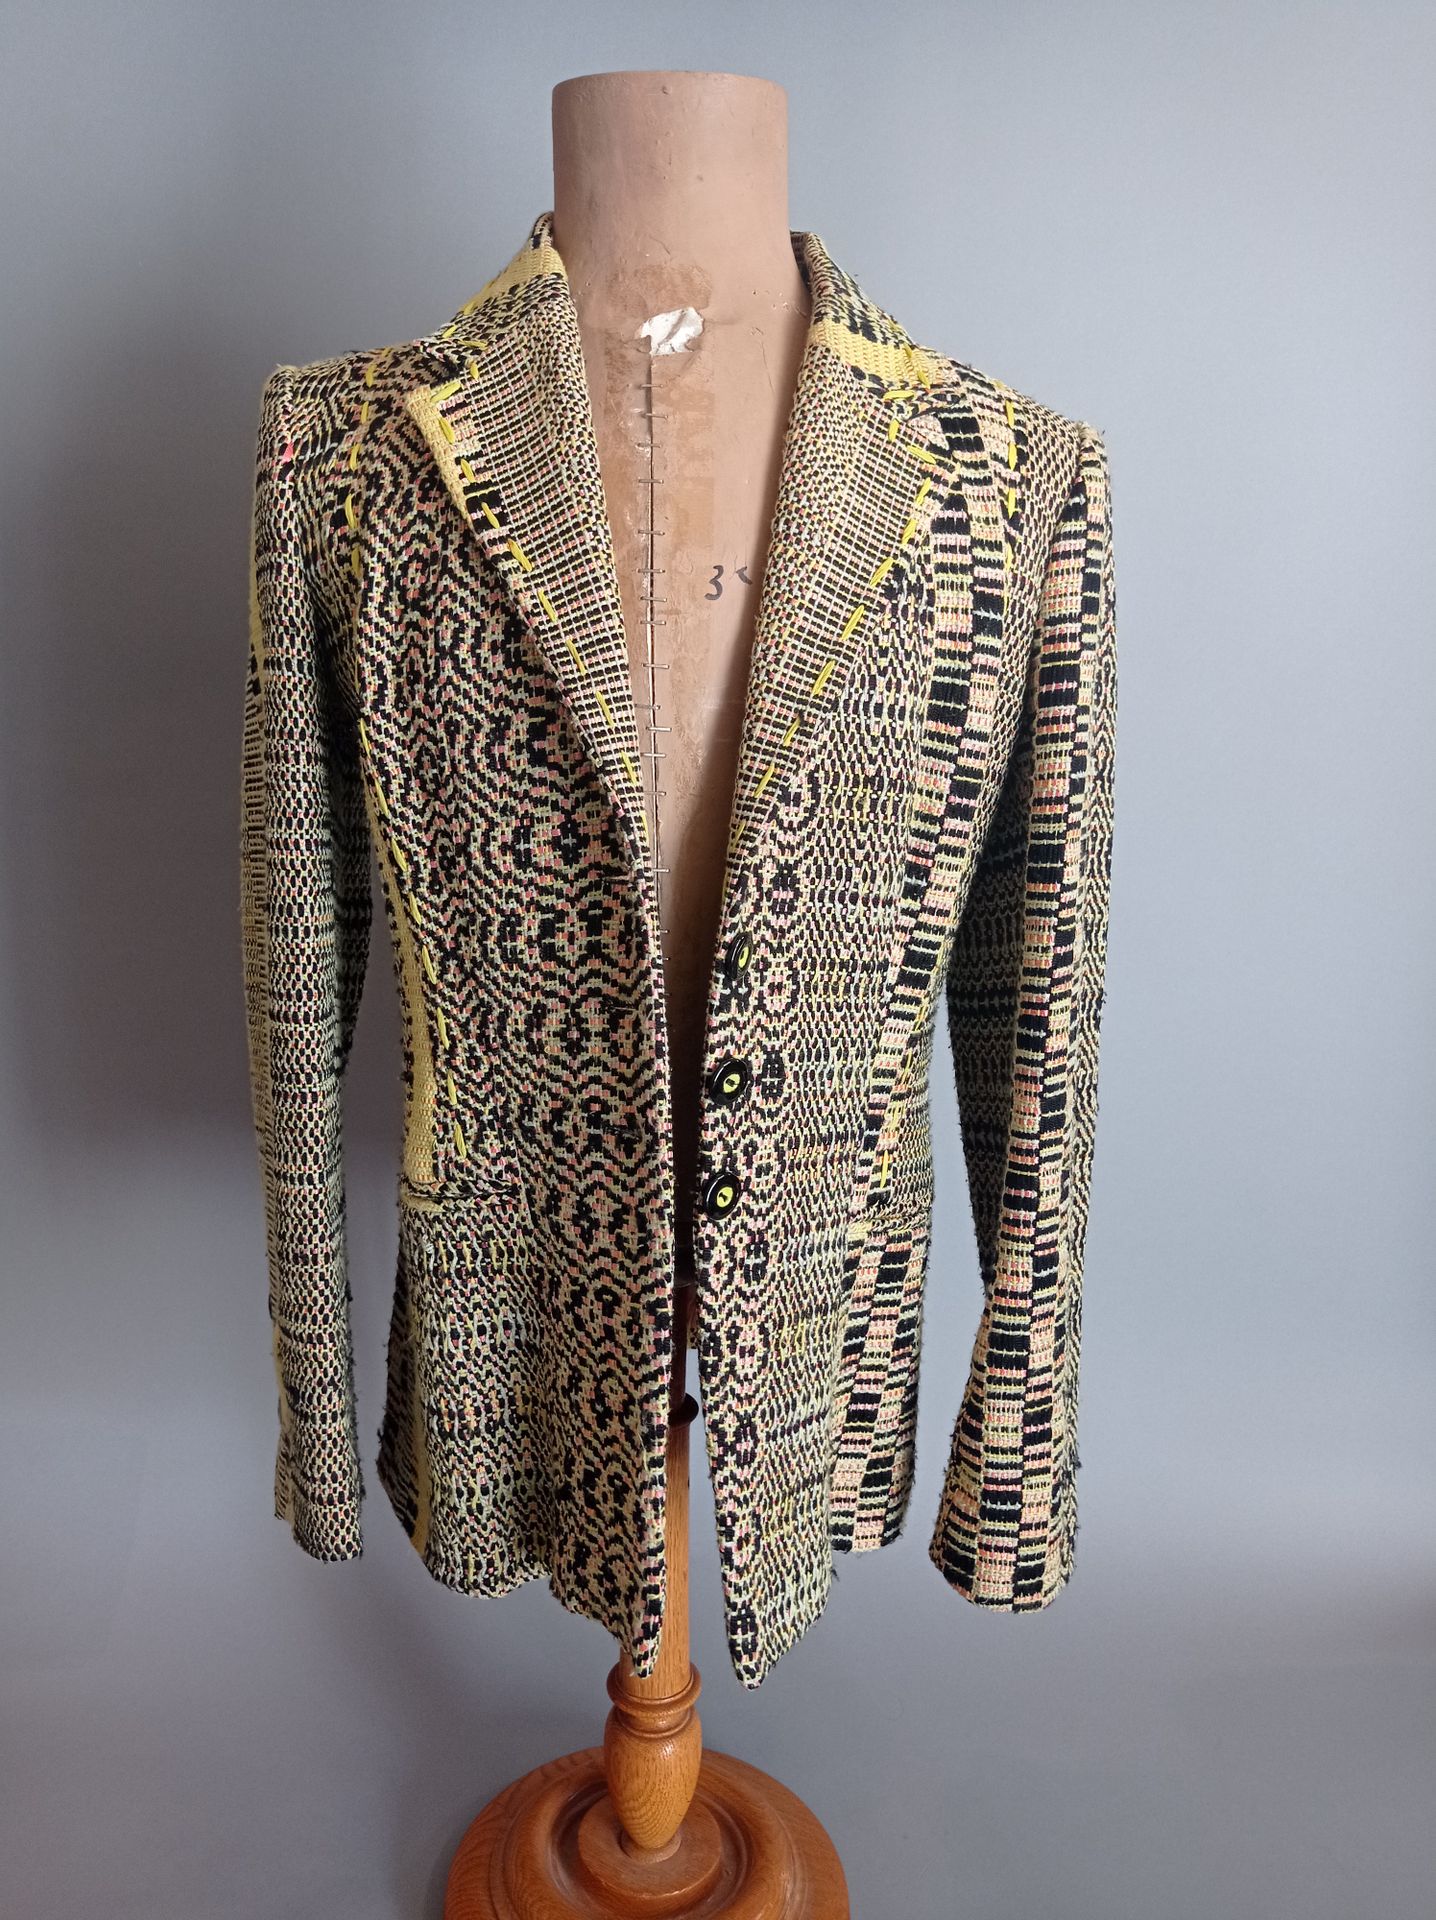 Christian LACROIX Yellow and pink tweed jacket
Size 42
Attached is a Christian L&hellip;